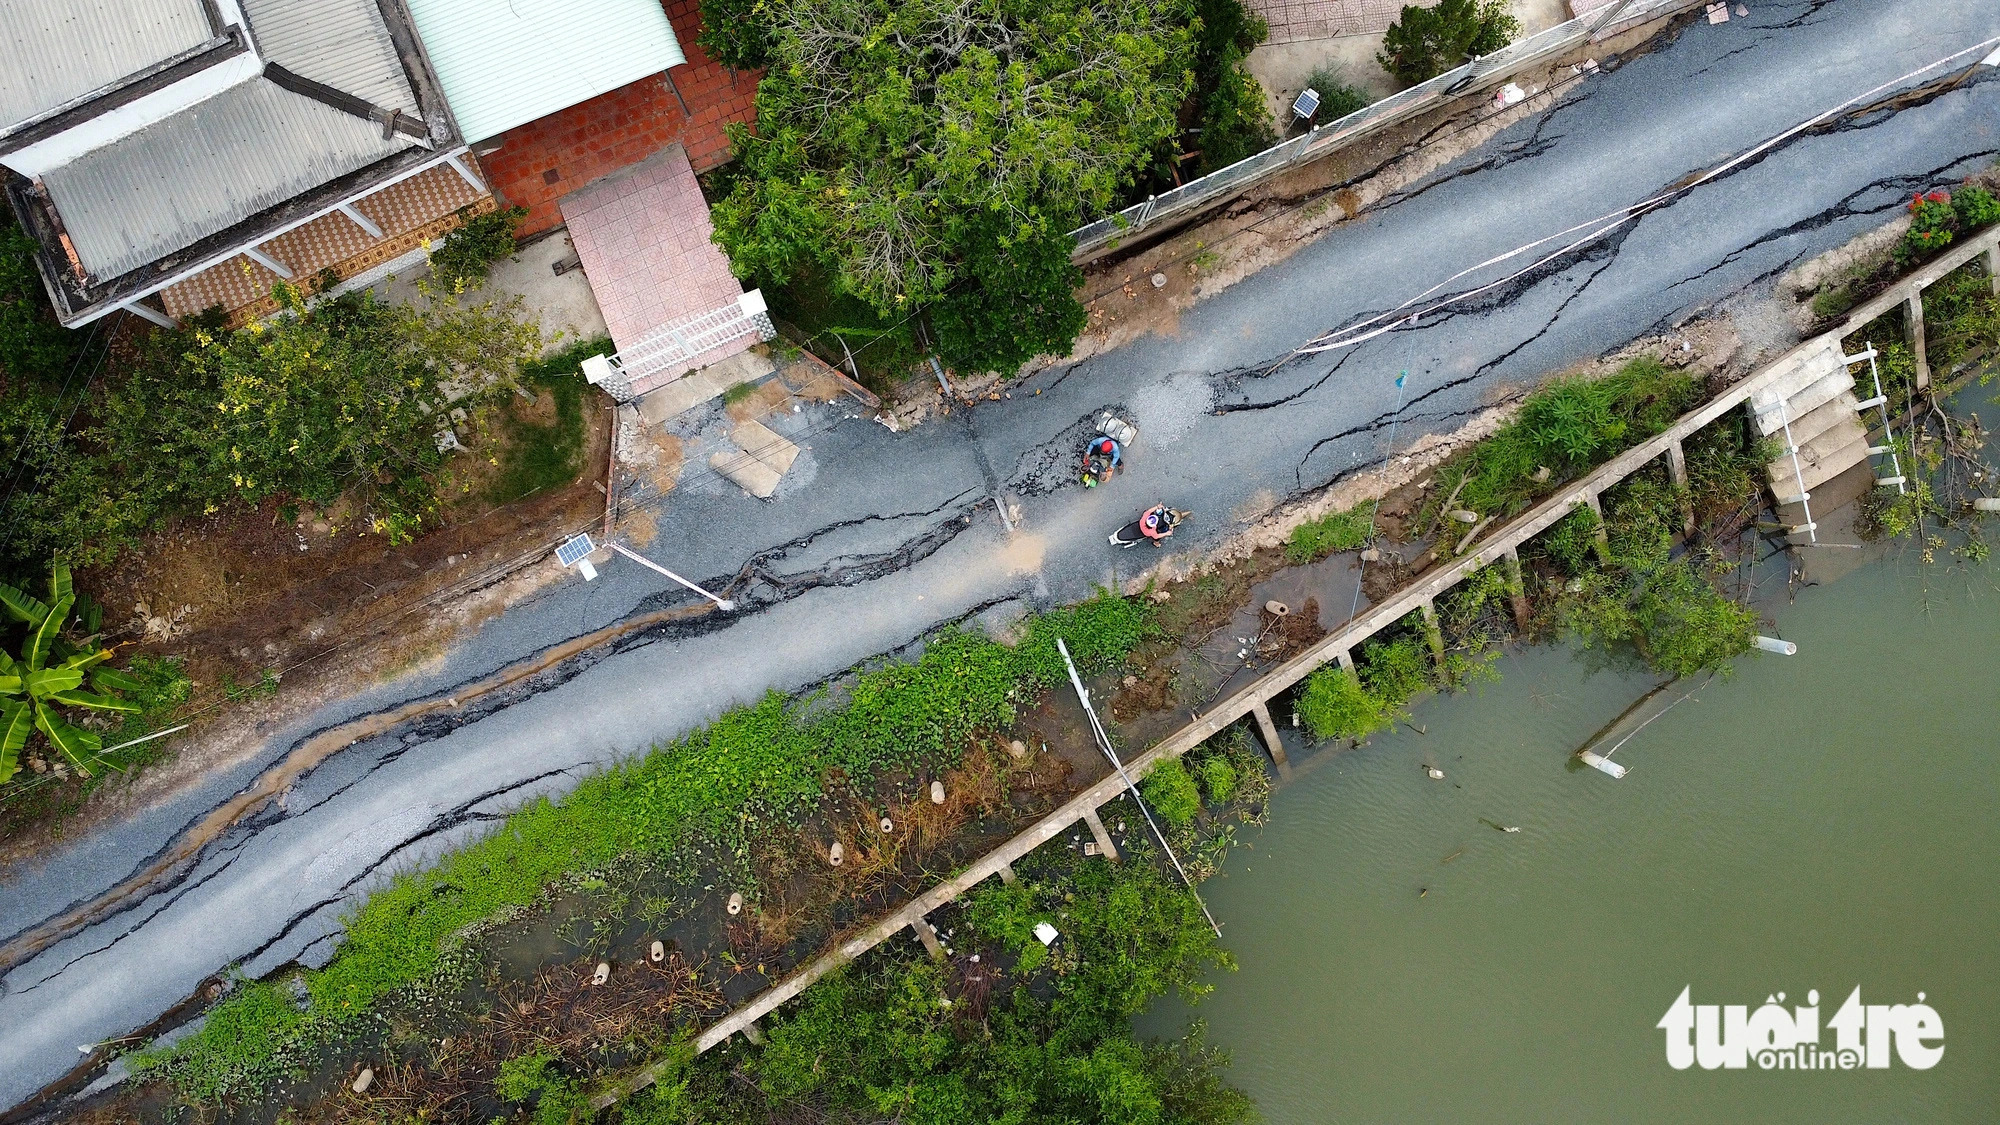 Local commuters try to pass through the road despite huge cracks. Photo: Mau Truong / Tuoi Tre